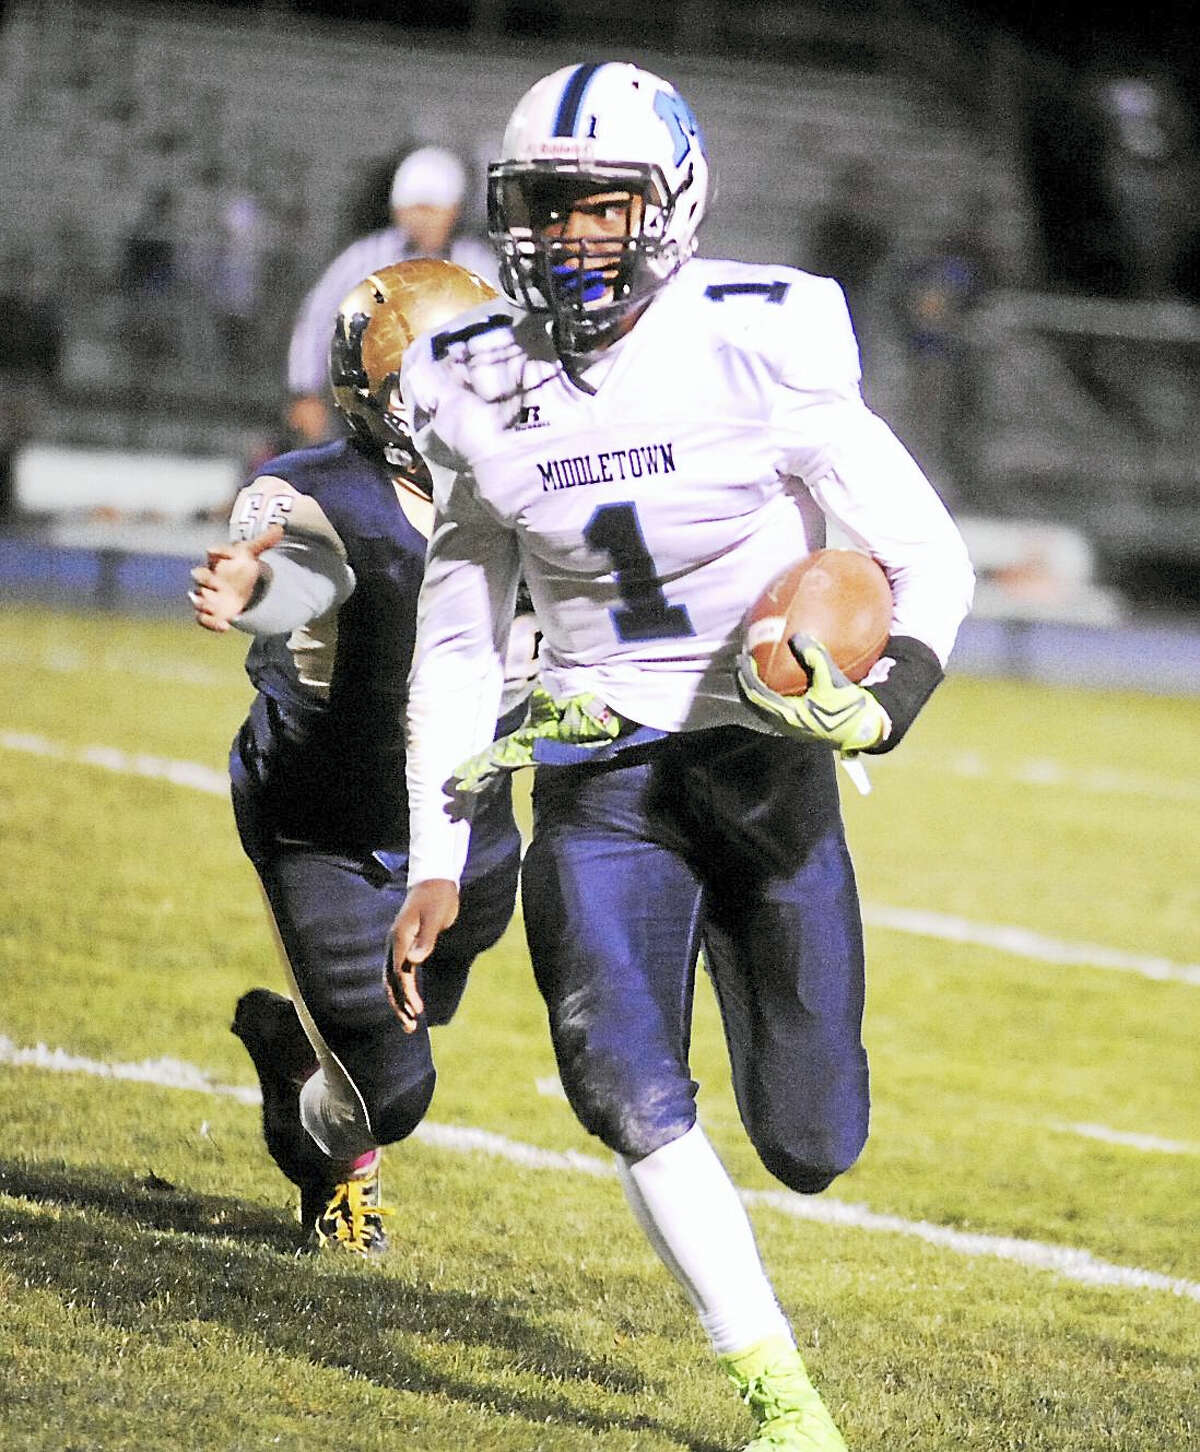 Middletown senior quarterback Tyshaun James rushed for 167 yards with three touchdowns against Newington.